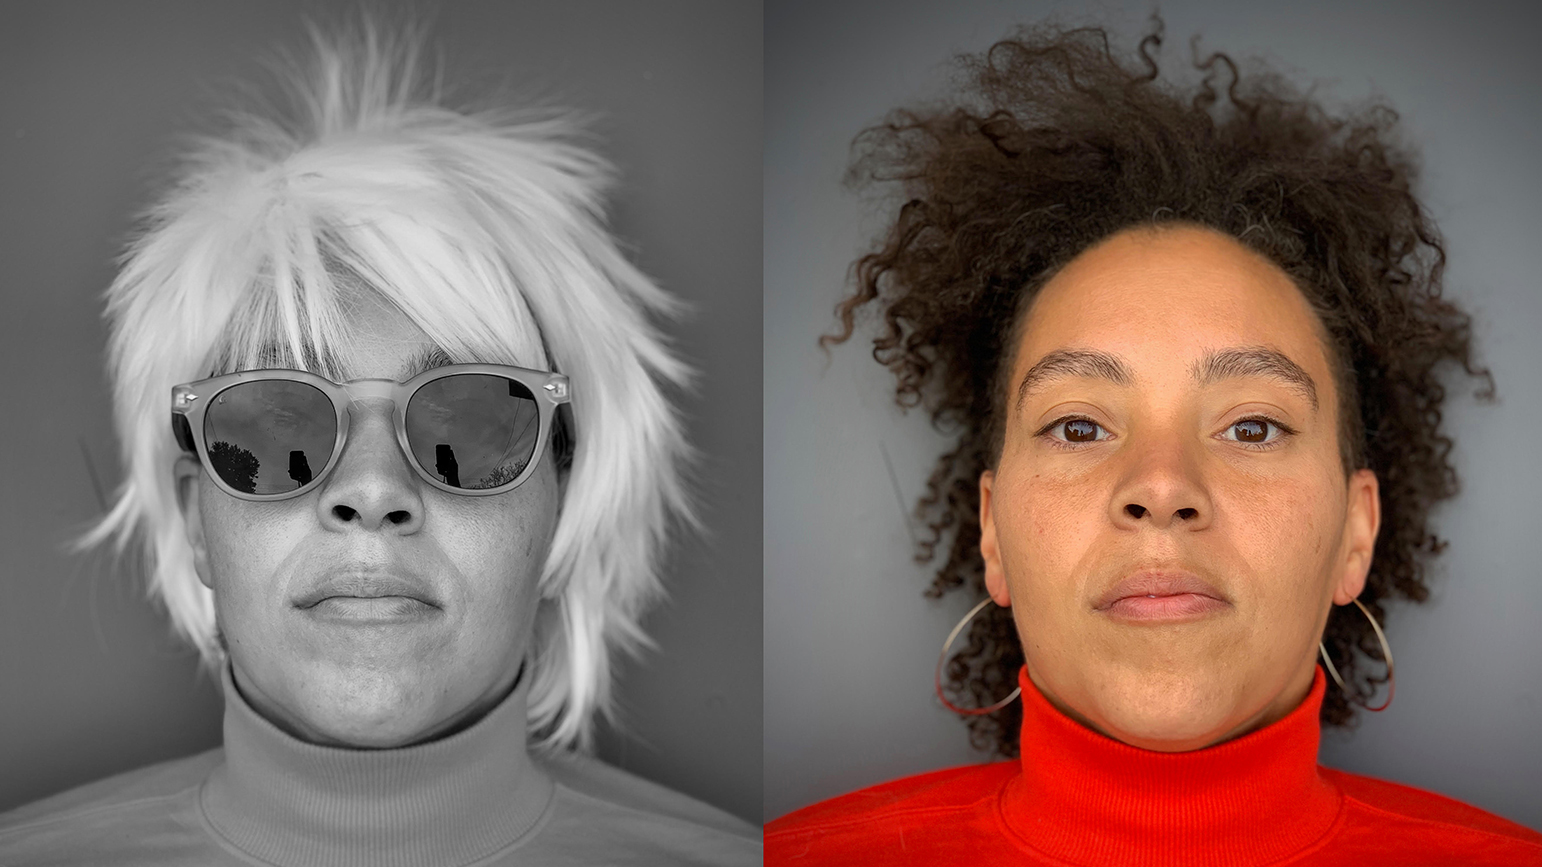 Two headshots of Alisha Wormsley, one in black and white dressed as Warhol and the other in color without costume